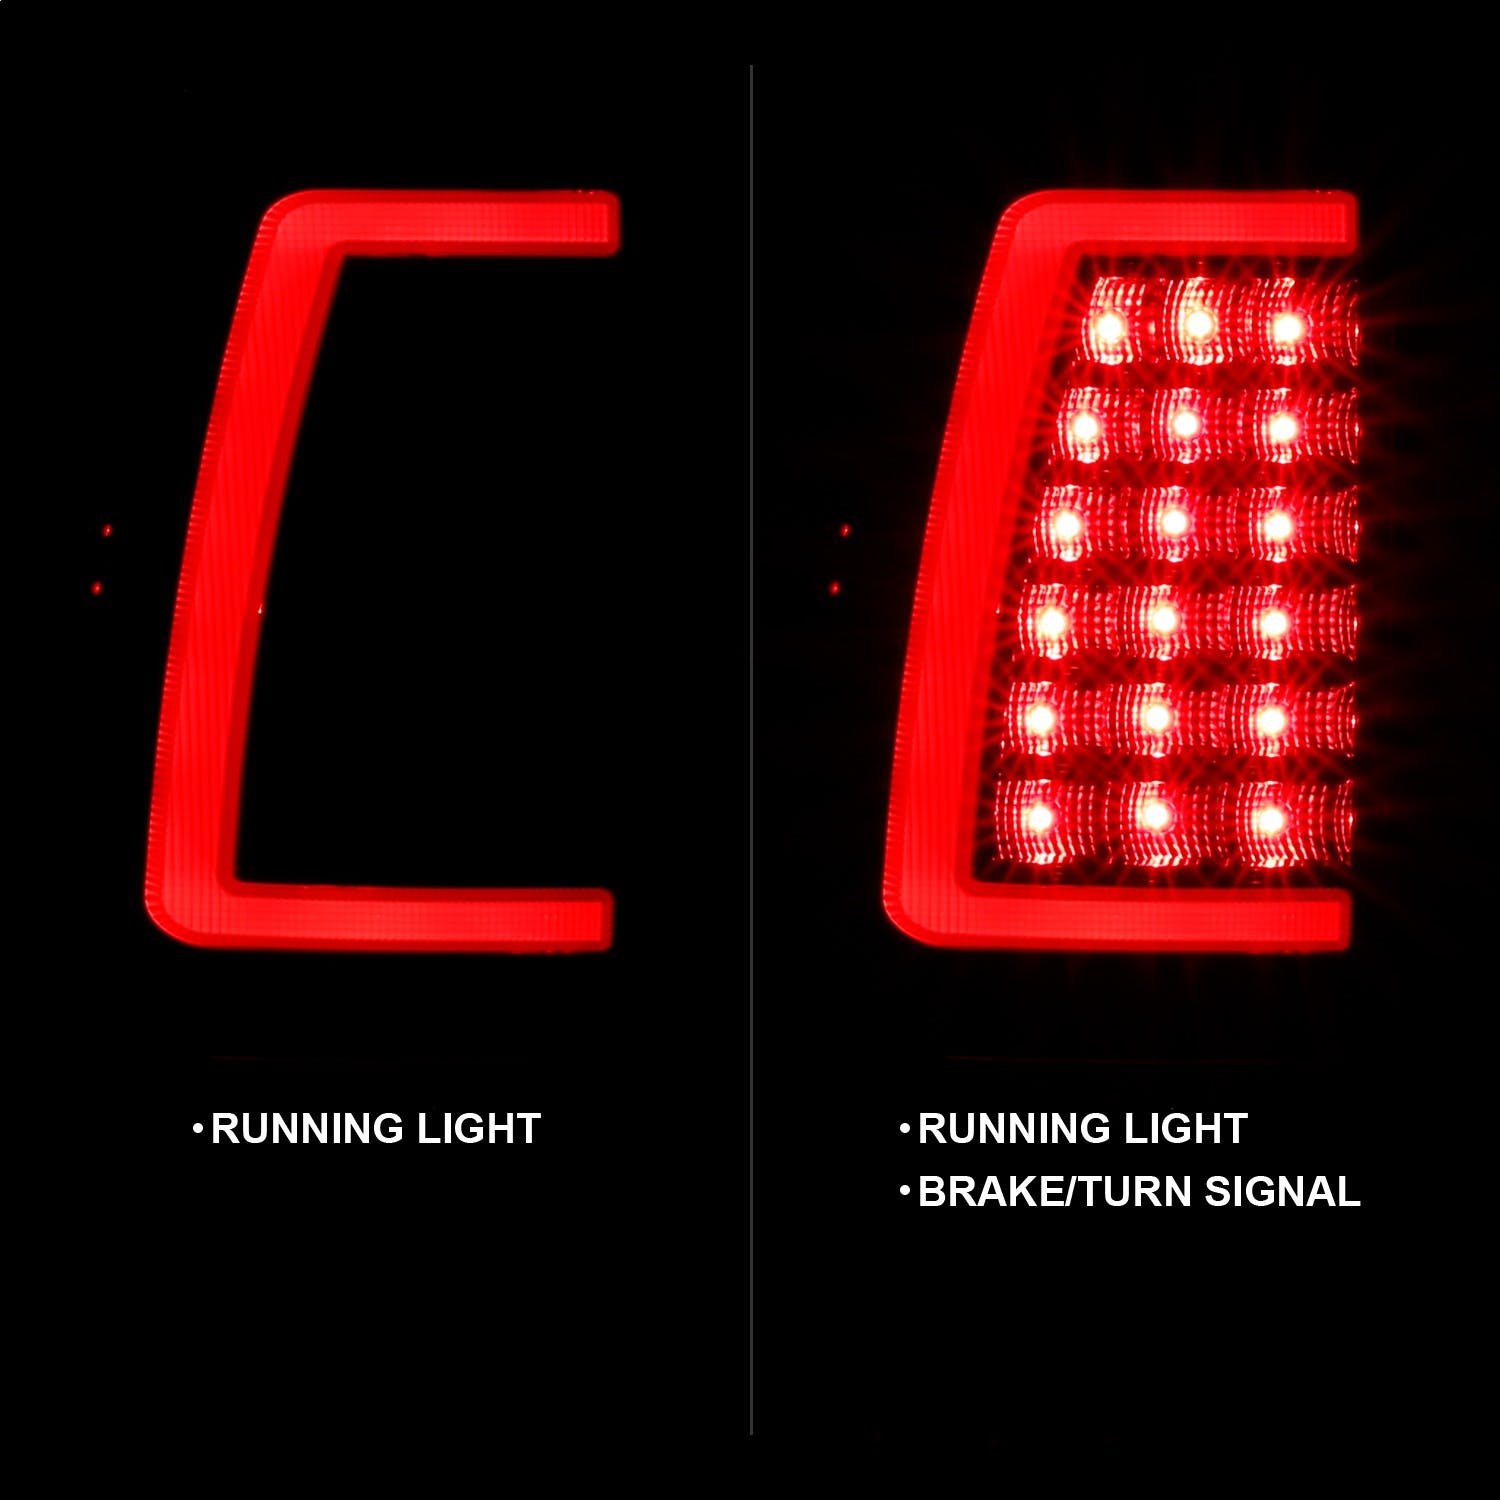 AnzoUSA 311330 LED Taillights Plank Style Black with Clear Lens